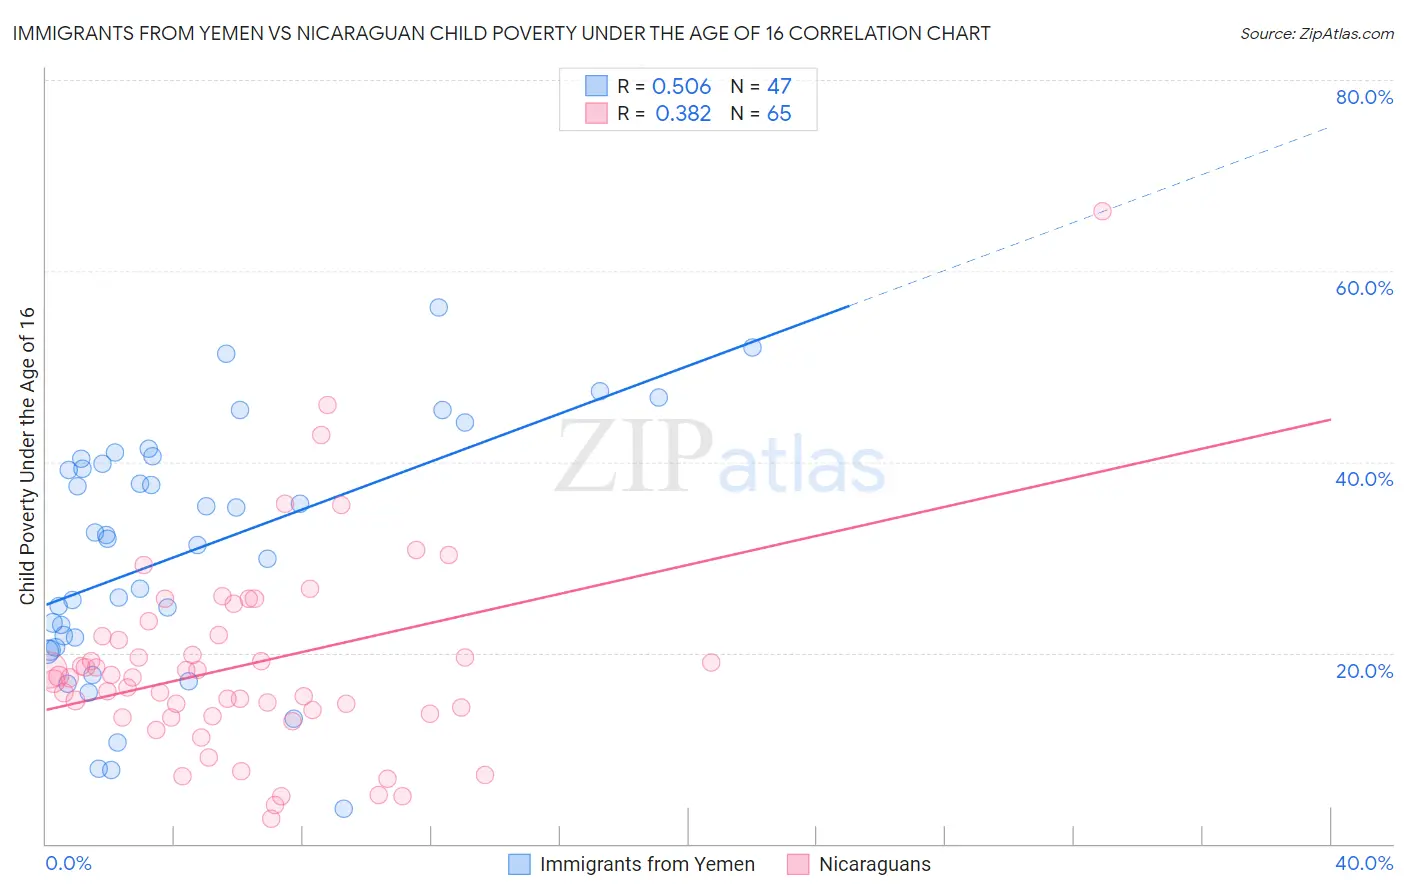 Immigrants from Yemen vs Nicaraguan Child Poverty Under the Age of 16